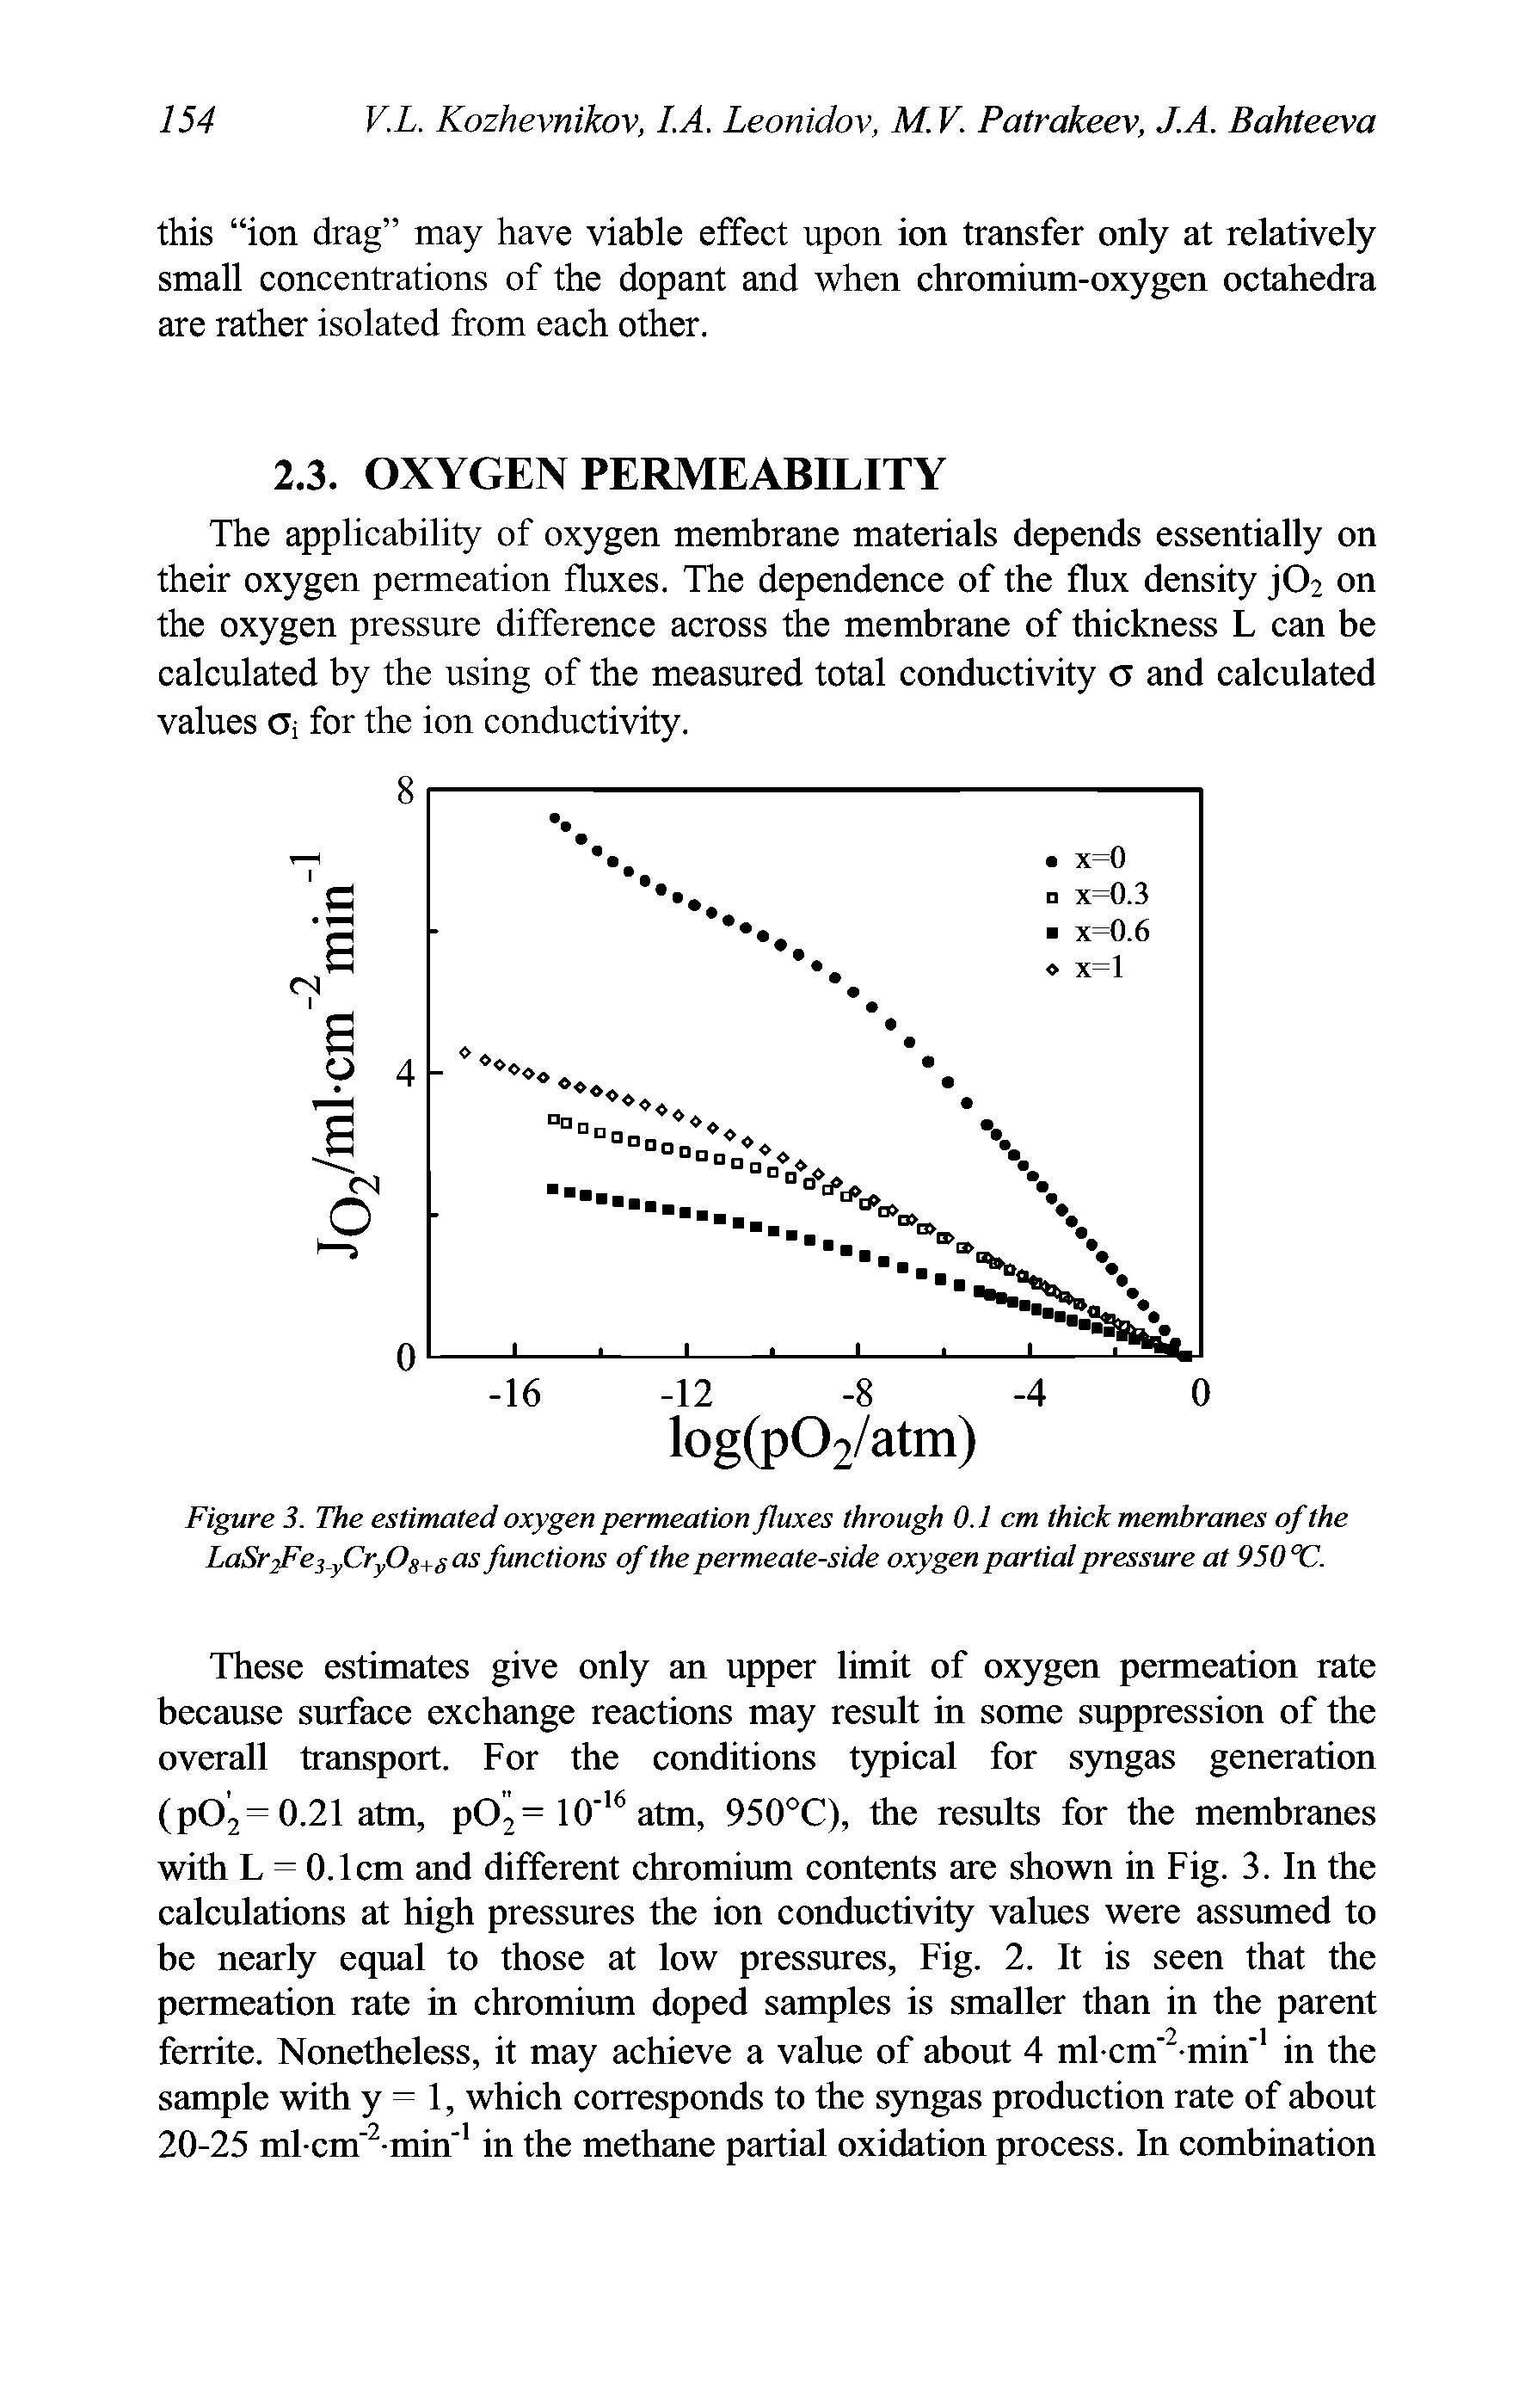 Figure 3. The estimated oxygen permeation fluxes through 0.1 cm thick membranes of the LaSr2Fe yCryOs+sas functions of the permeate-side oxygen partial pressure at 950X1.